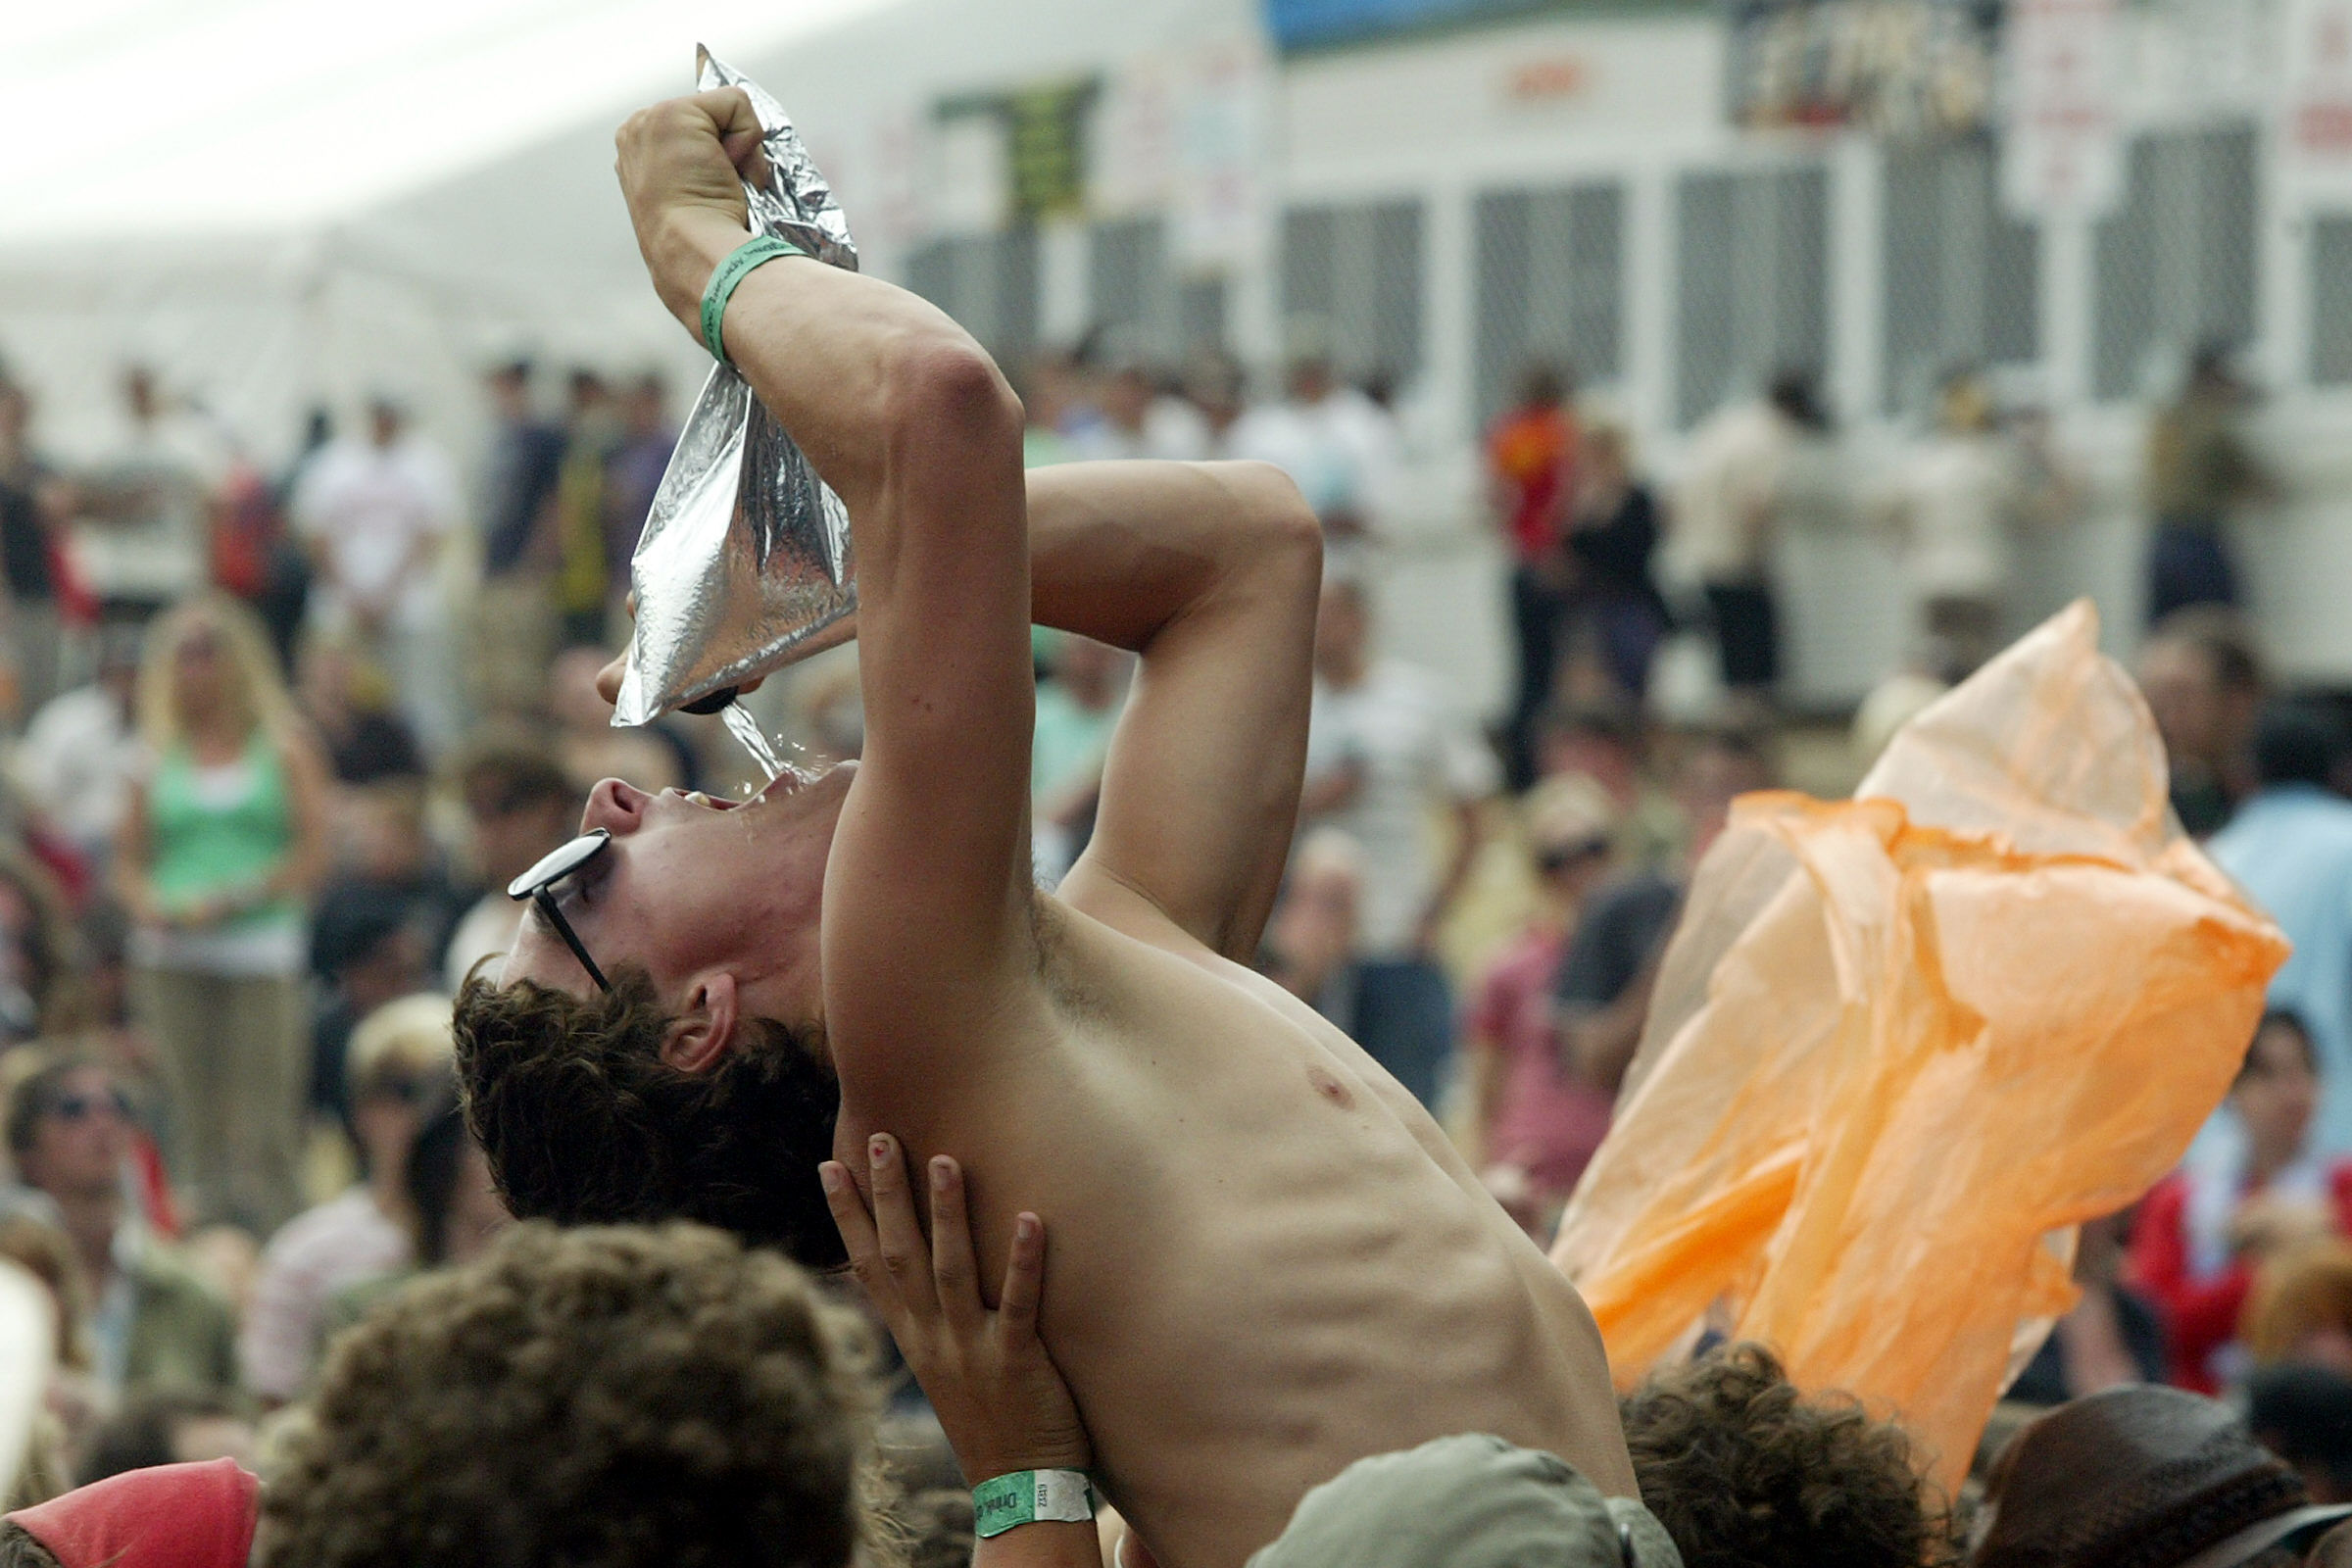 Festival-goer crowdsurfing and drinking cask wine at the same time. 